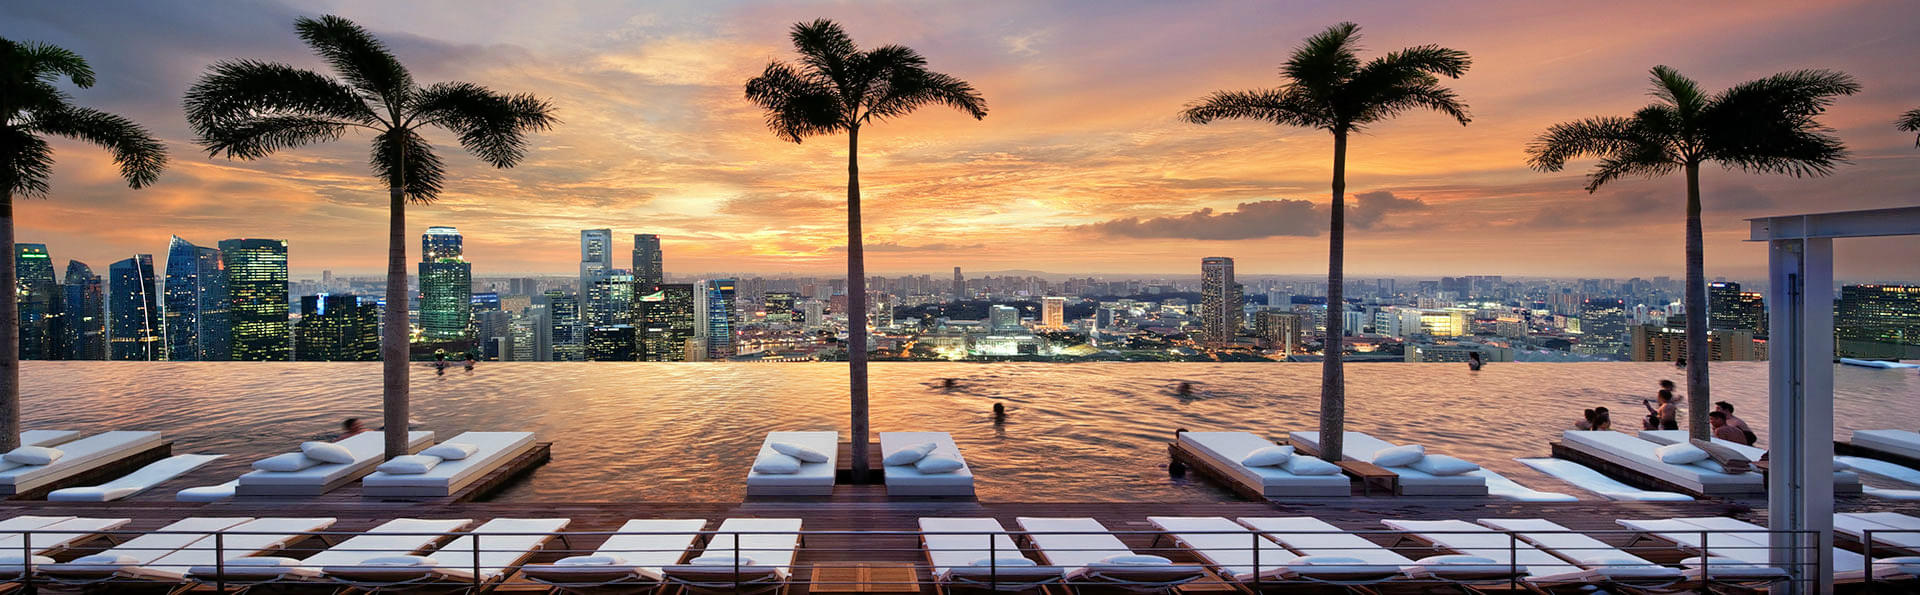 Marina Bay Sands Infinity Pool Overview